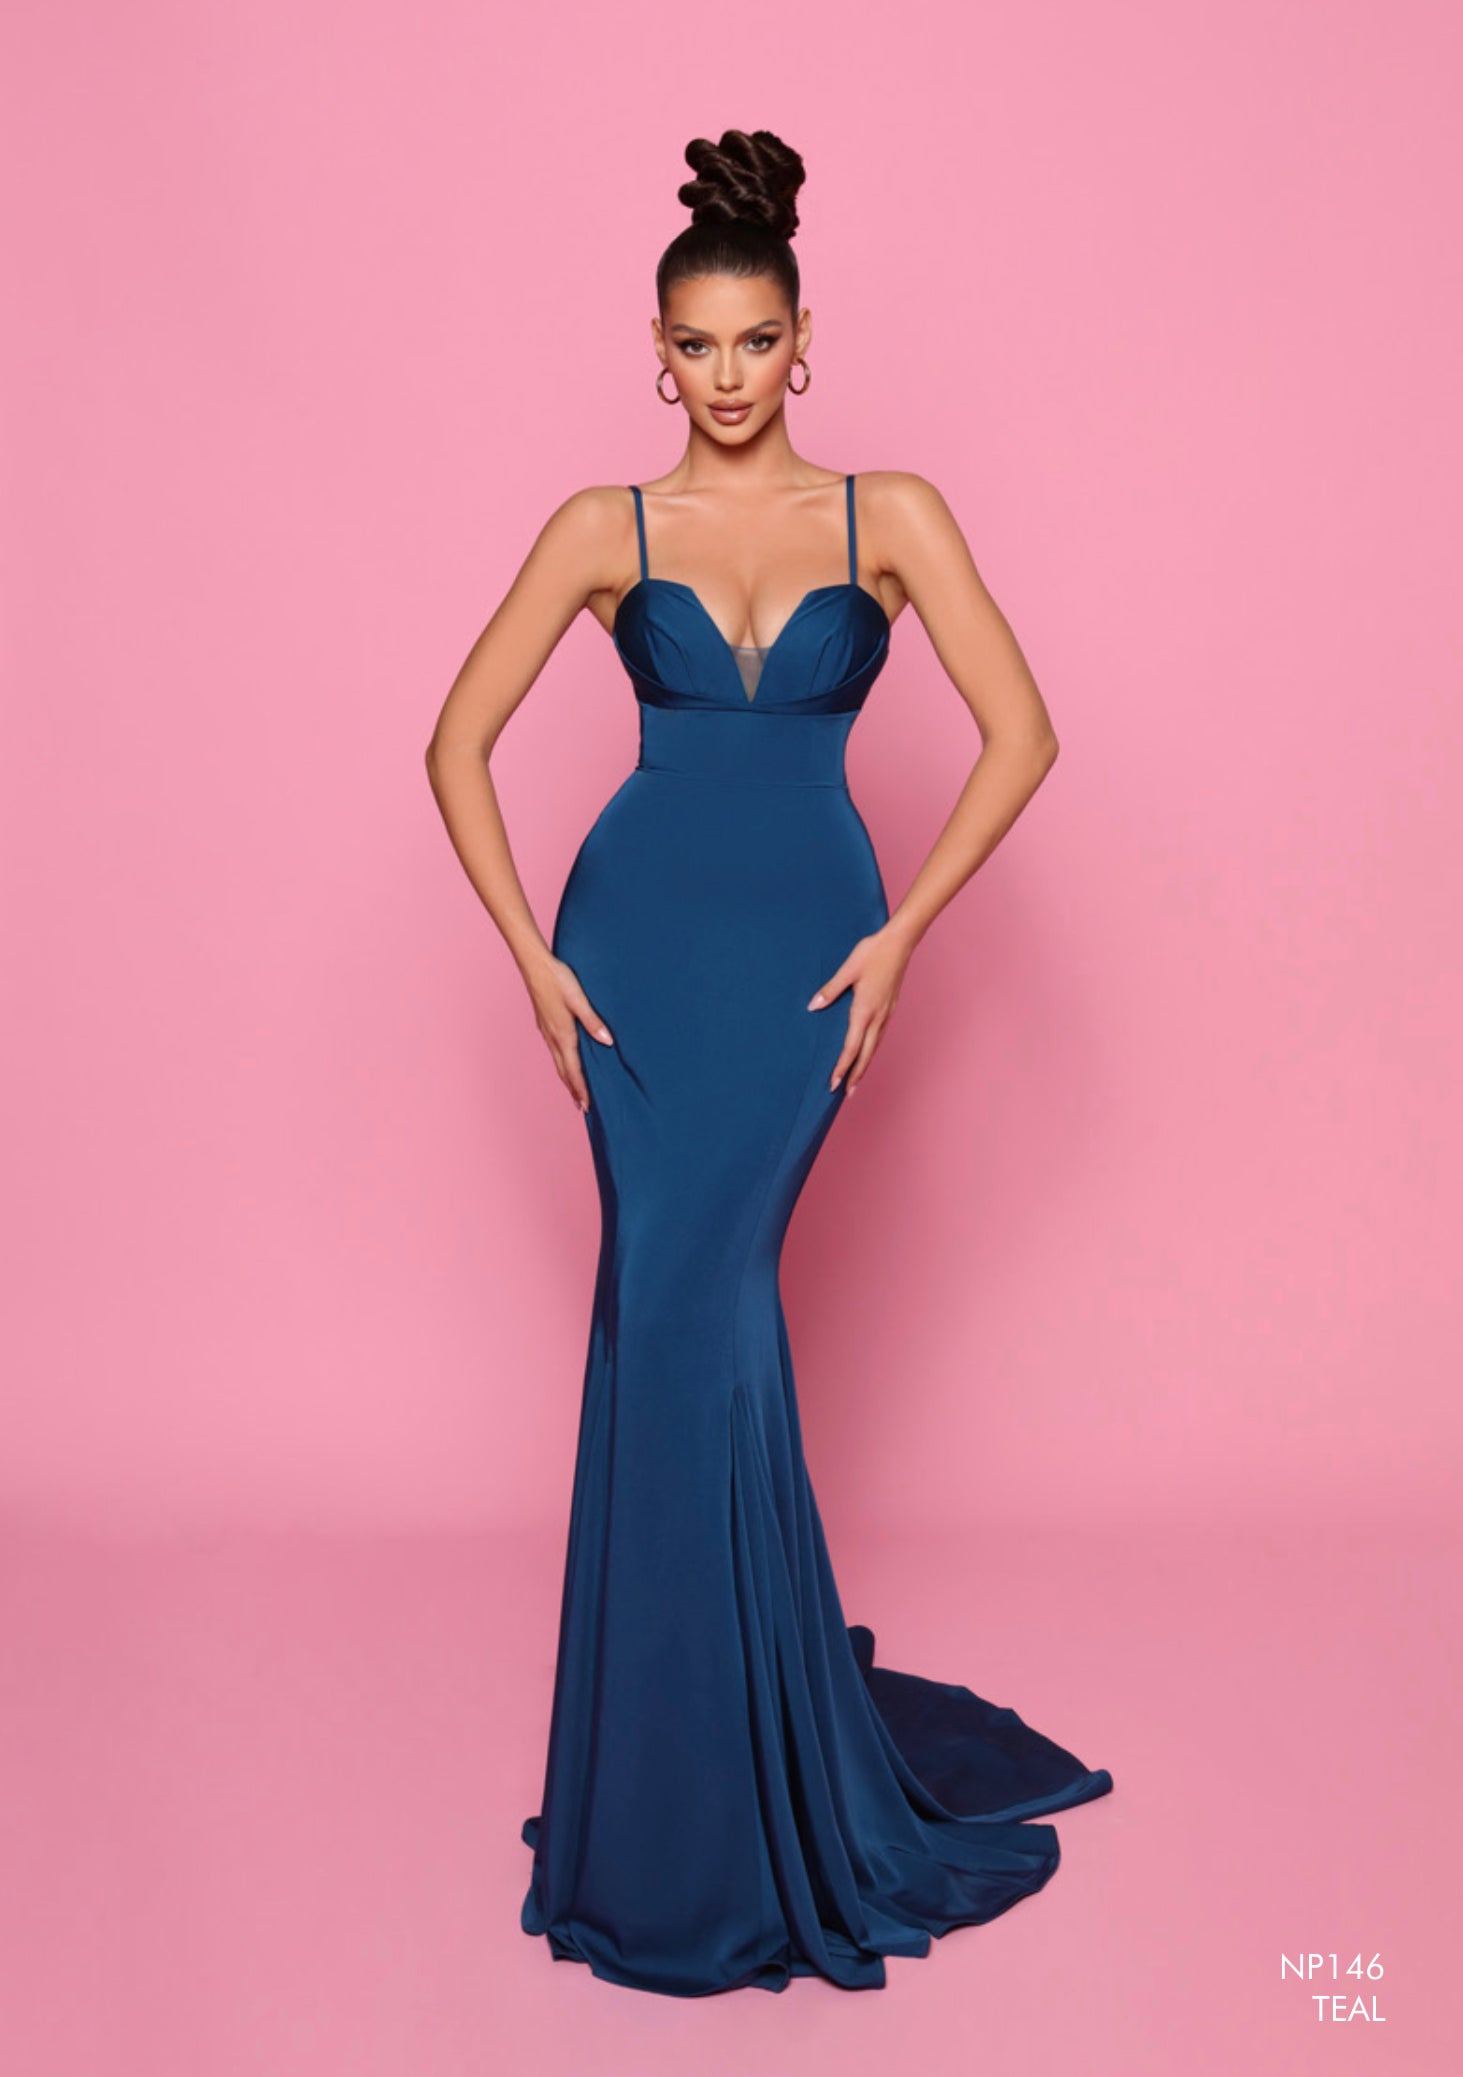 NP146 by Nicoletta Red, Teal, Musk, & Ivory Formal Dress